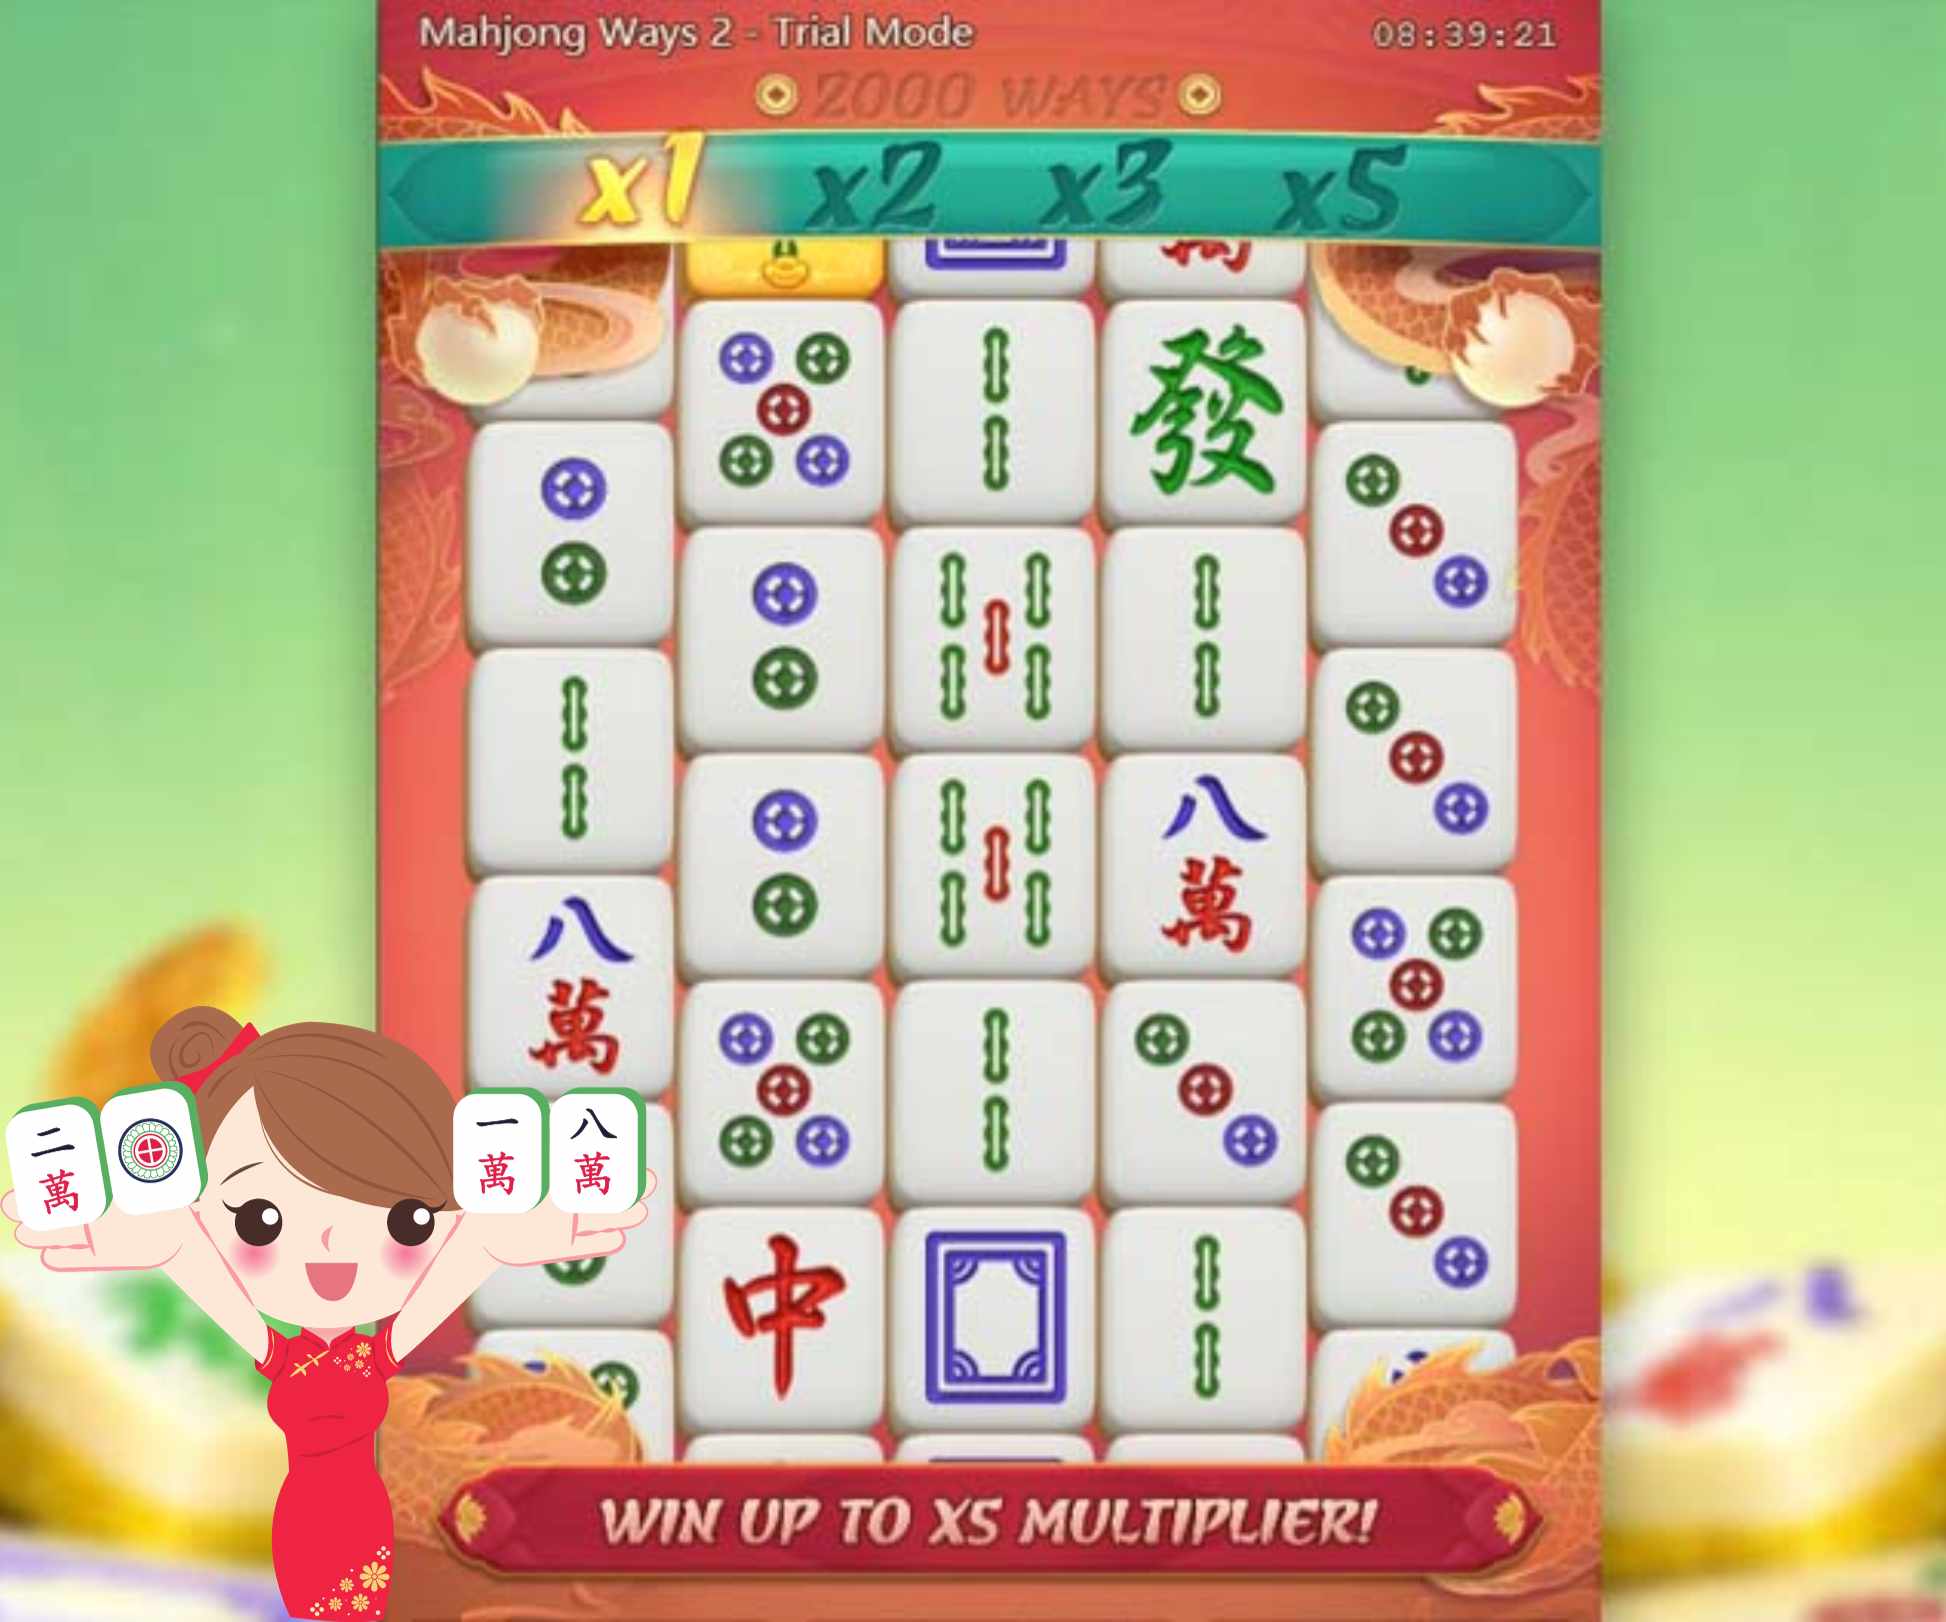 Mahjong slot style game is a new taste of slots